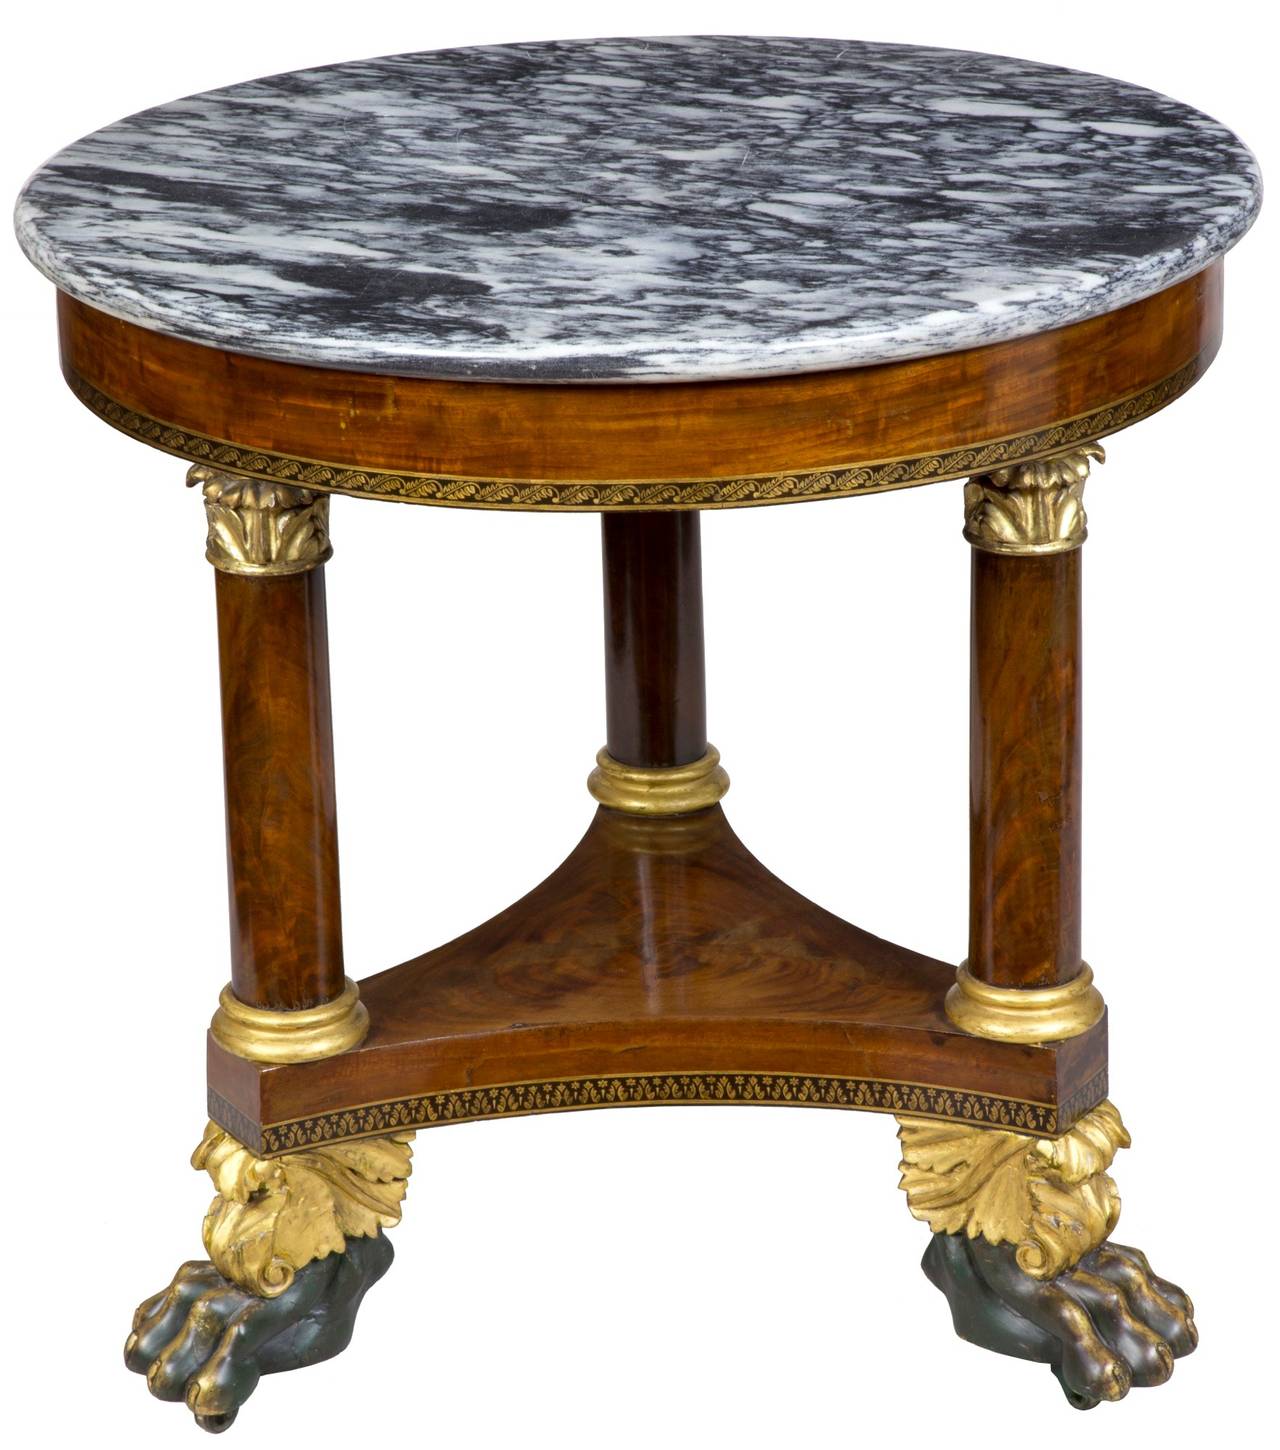 This marble table is on the small side, retaining its original King of Prussia marble. The stenciling is in superb condition, as is the beautifully figured marble. The paw feet are strongly developed and give this piece a commanding presence. It’s